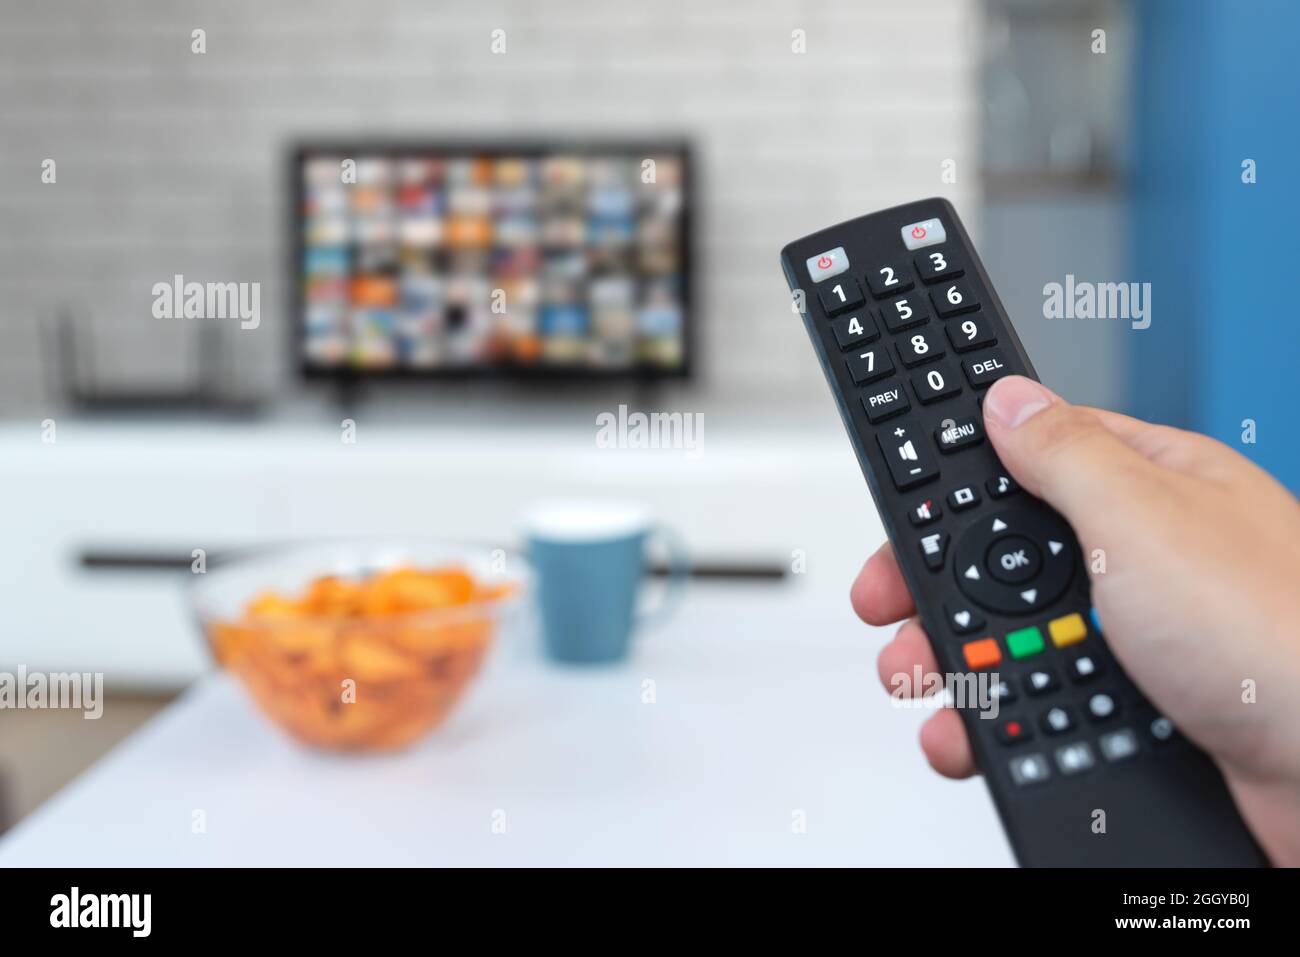 Man watching TV, remote control in hand. VOD service on TV Stock Photo